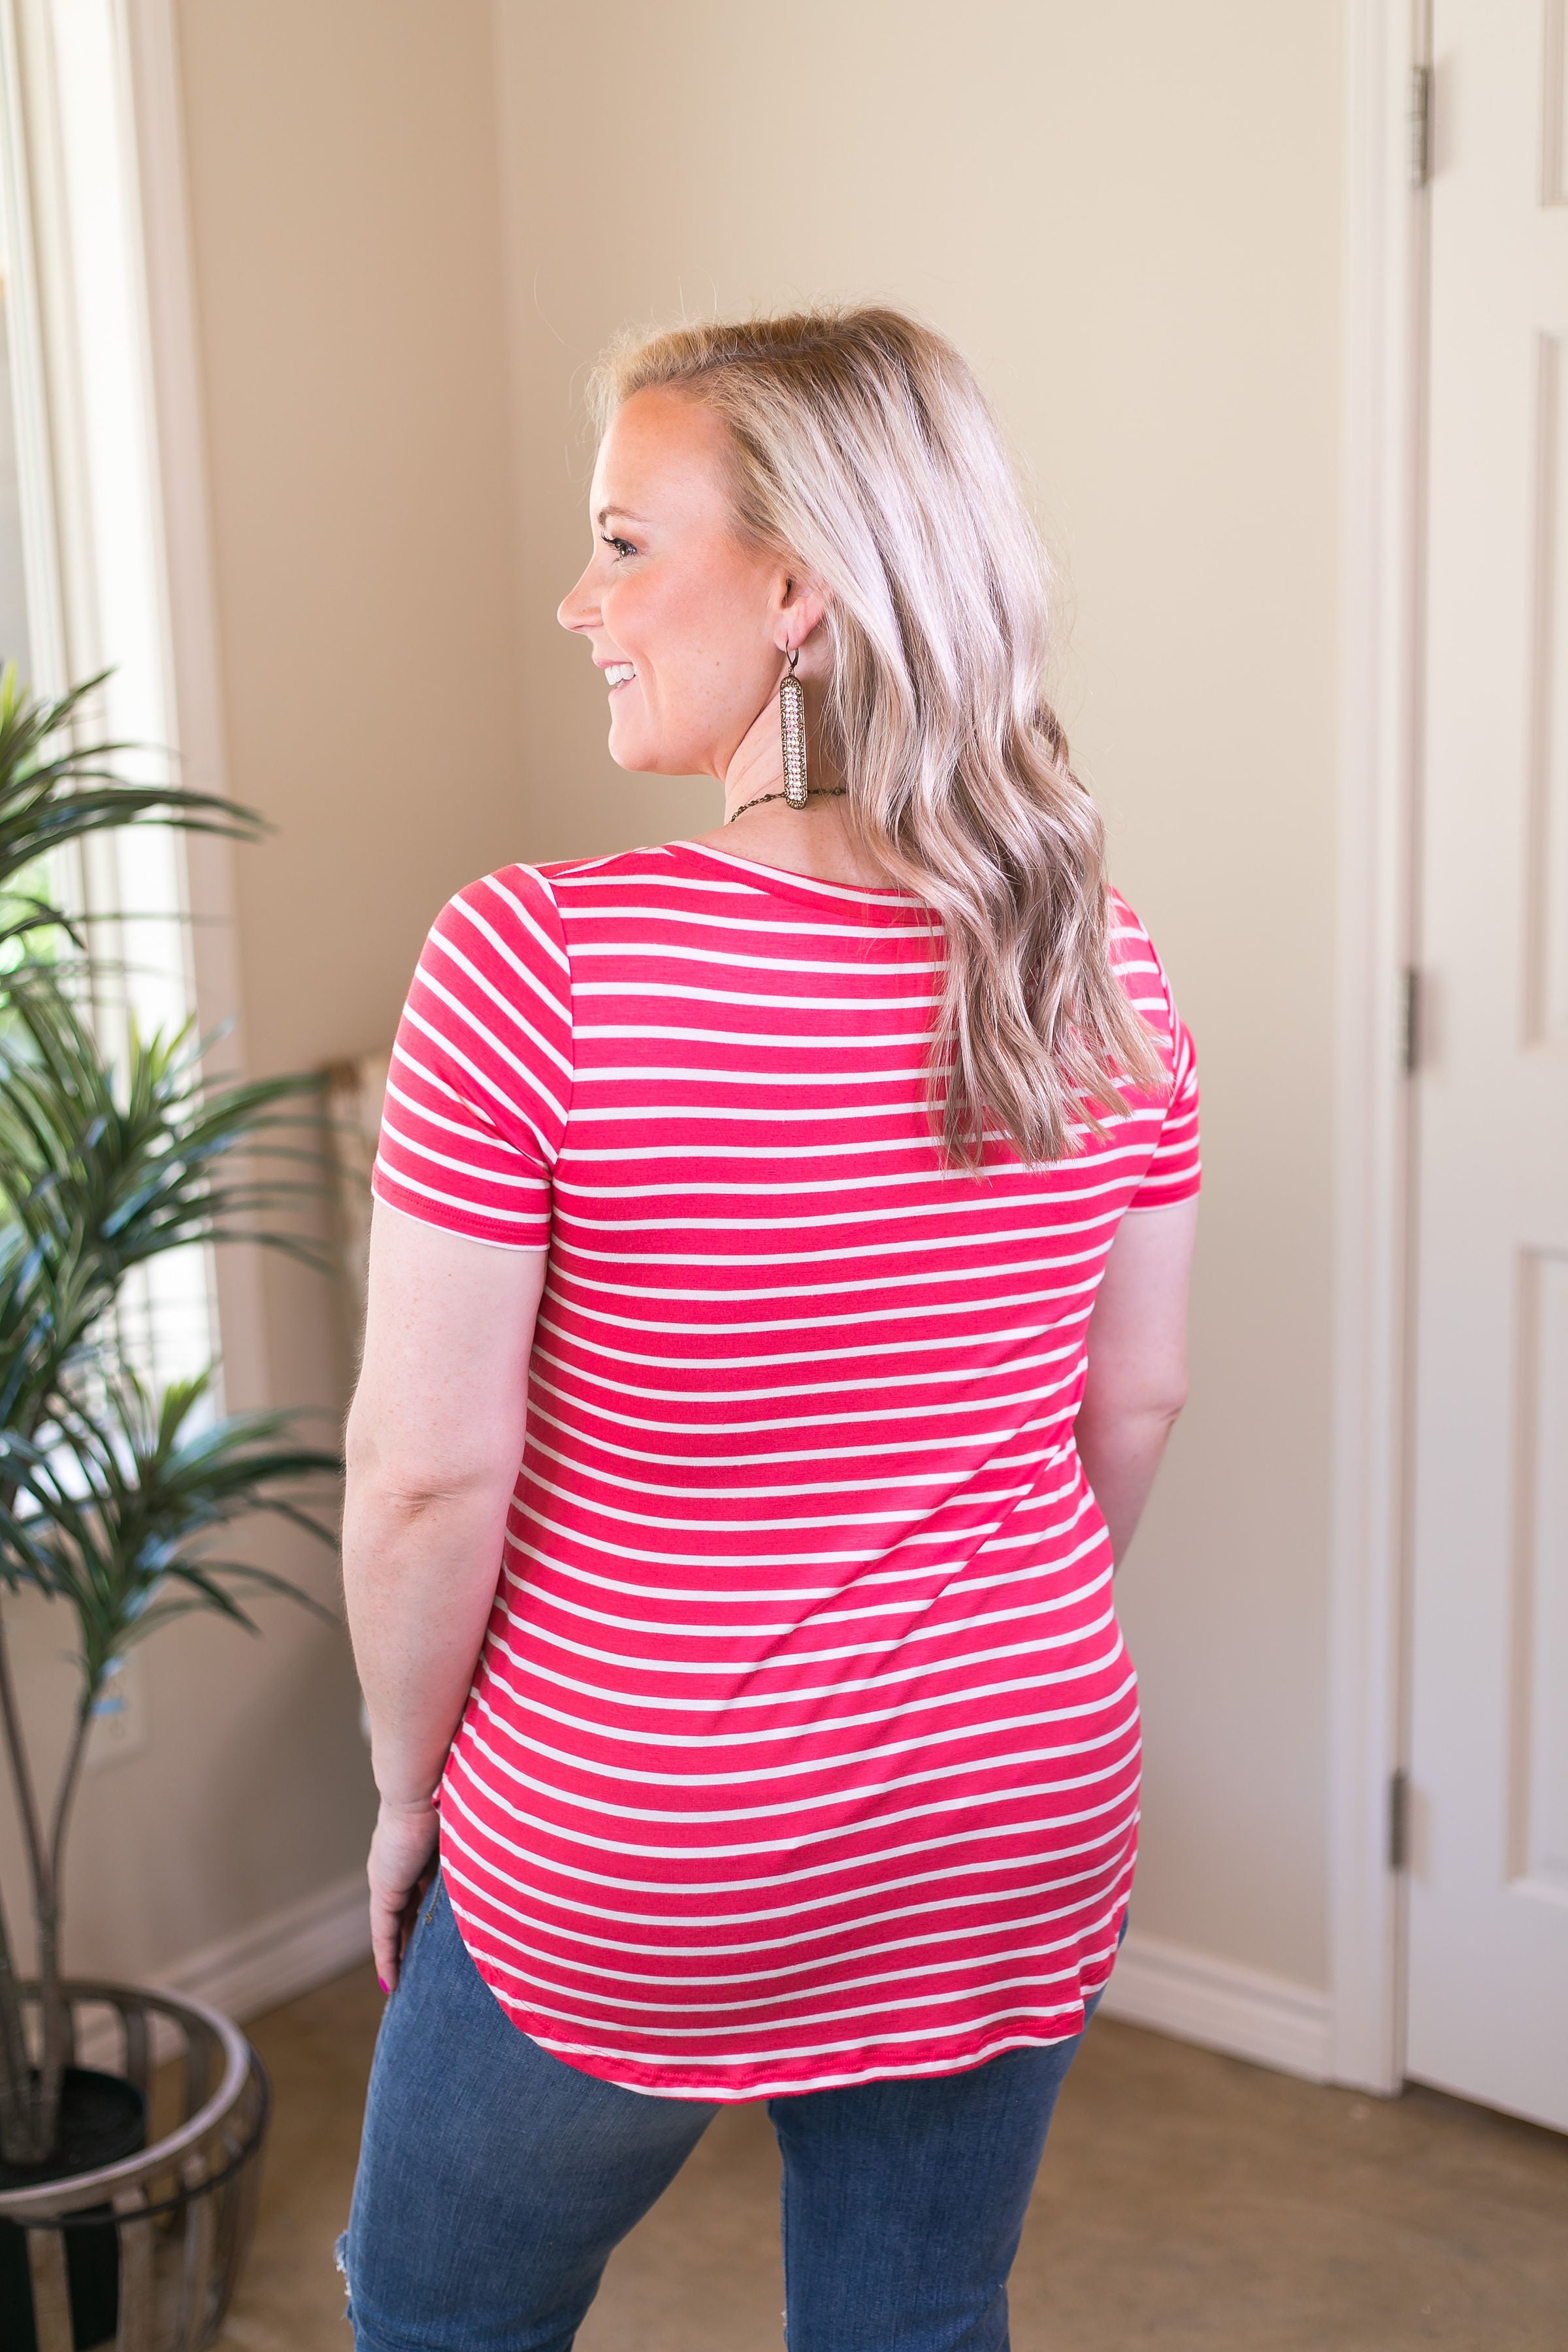 Simply The Best Striped V Neck Short Sleeve Tee Shirt in Coral Pink - Giddy Up Glamour Boutique